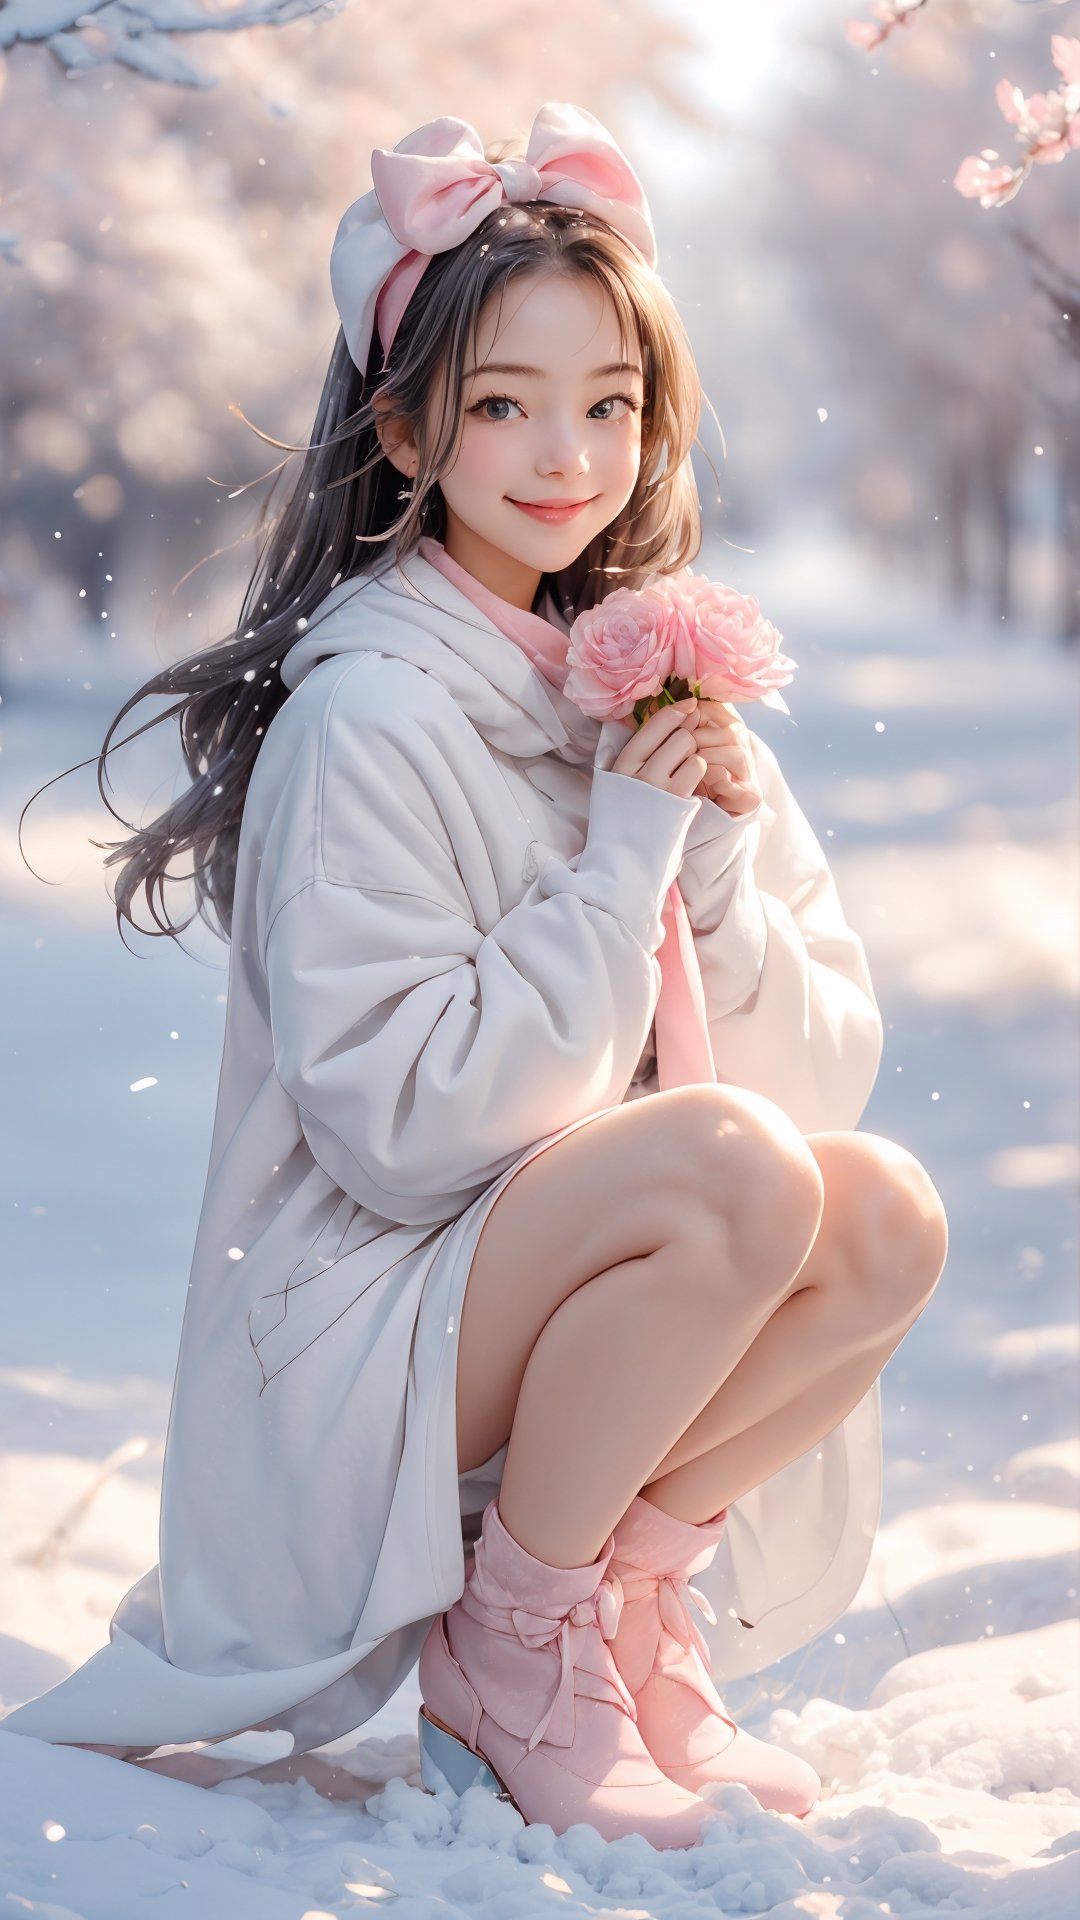 Winter style, snow falling, plum flowers blooming, A cute little girl wears pink and white fluffy coat and scarf, with a pink bow tied on her head. She smiled brightly and her eyes twinkled with kindness. She held a pink rose in her hand and smelled the fragrance. Under her feet is a lush green flower and grass, as if she is a part of nature. Her laughter in the breeze adds a touch of childlike innocence to this beautiful scene. Please give her some more background or context so we can add more details ,perfect split lighting,ZGirl,Nature, flowers blooming fantastic and dreamy light romantic lighting bokeh background ,snow_scene_background,1 girl